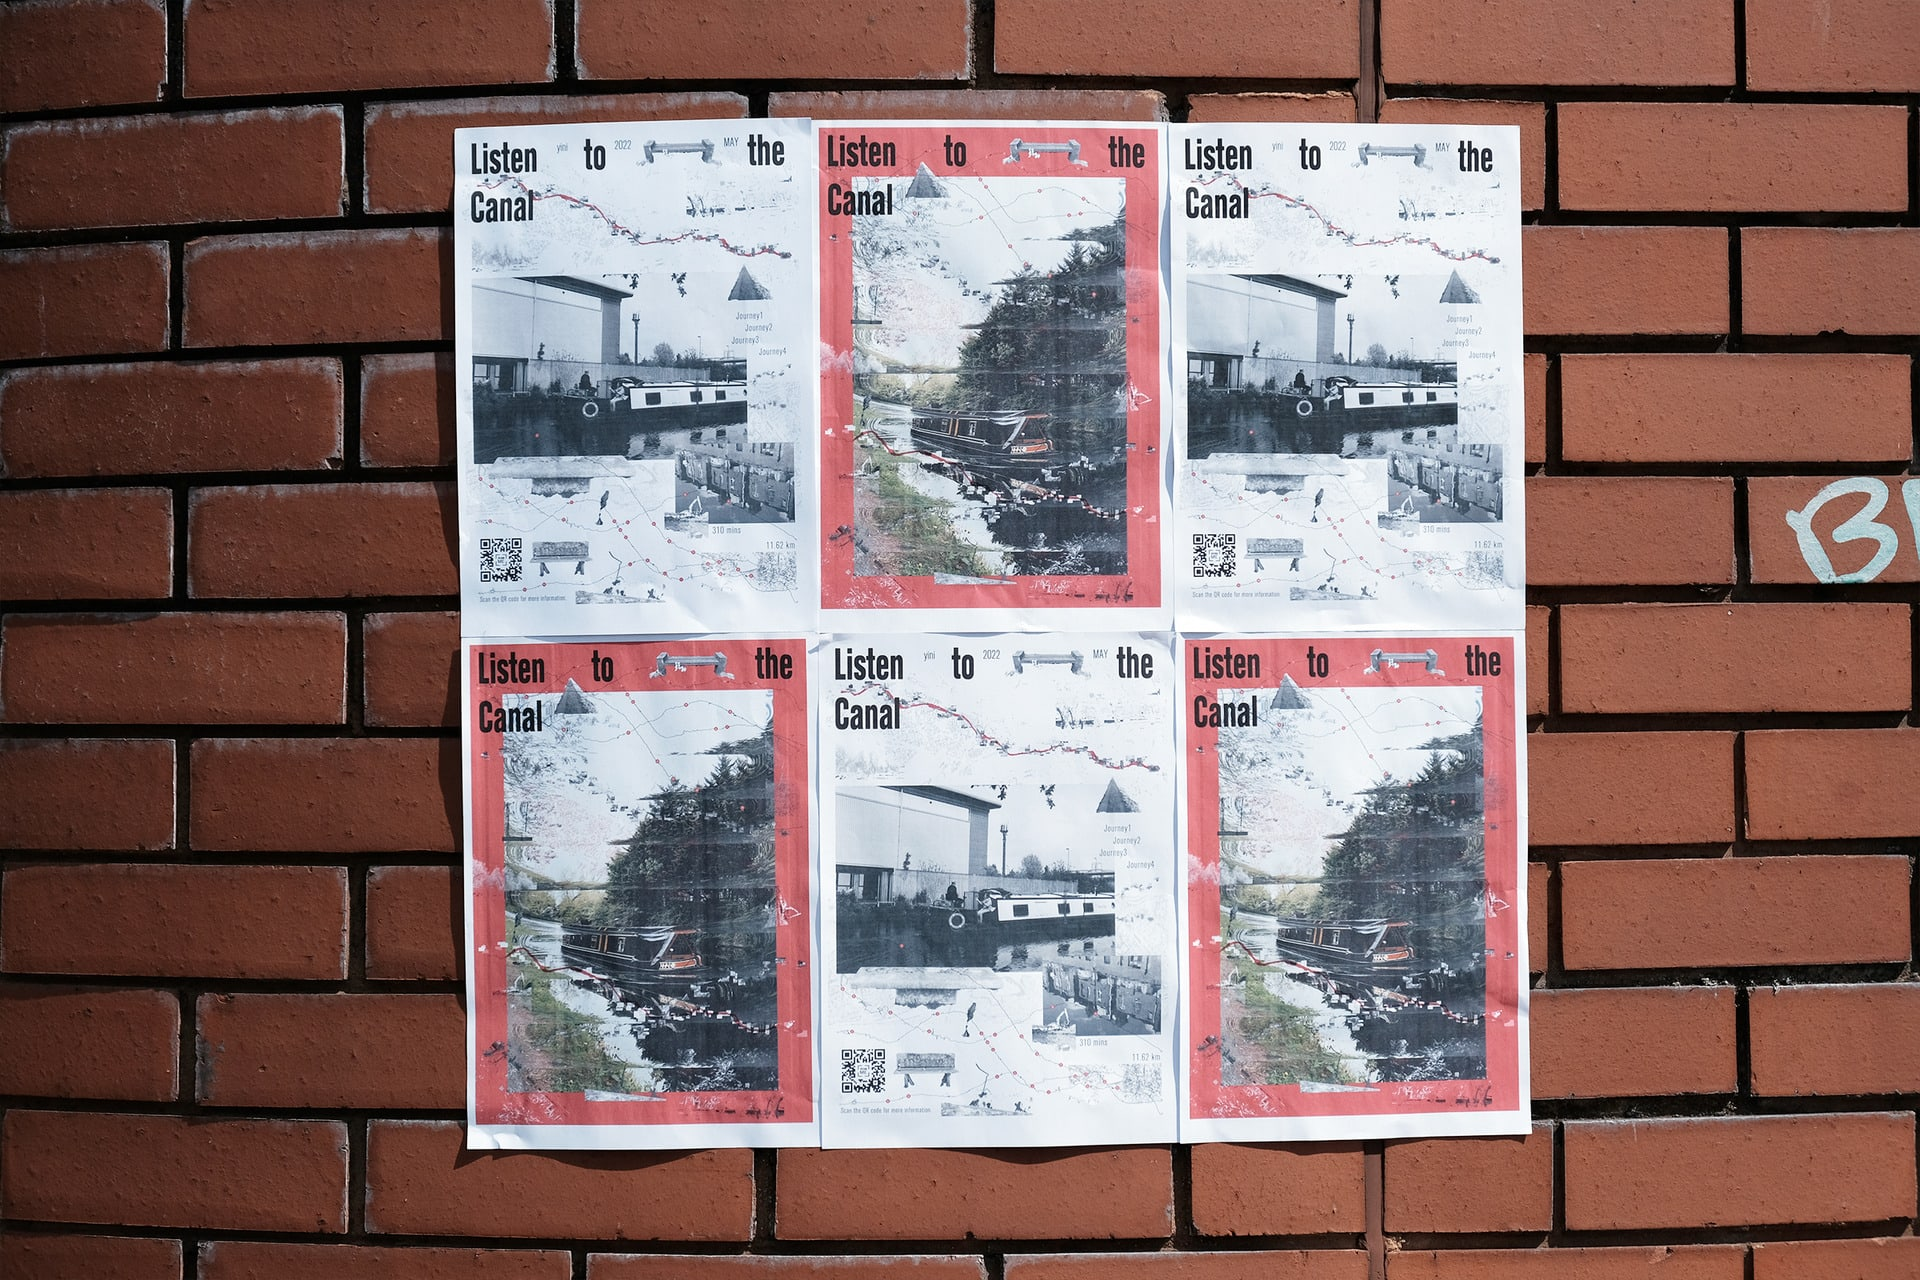 Image of six paper posters, in two alternating designs, featuring black and white photographs of canal boats and text reading ‘Listen to the Canal’, placed in a grid on a brown brick wall.